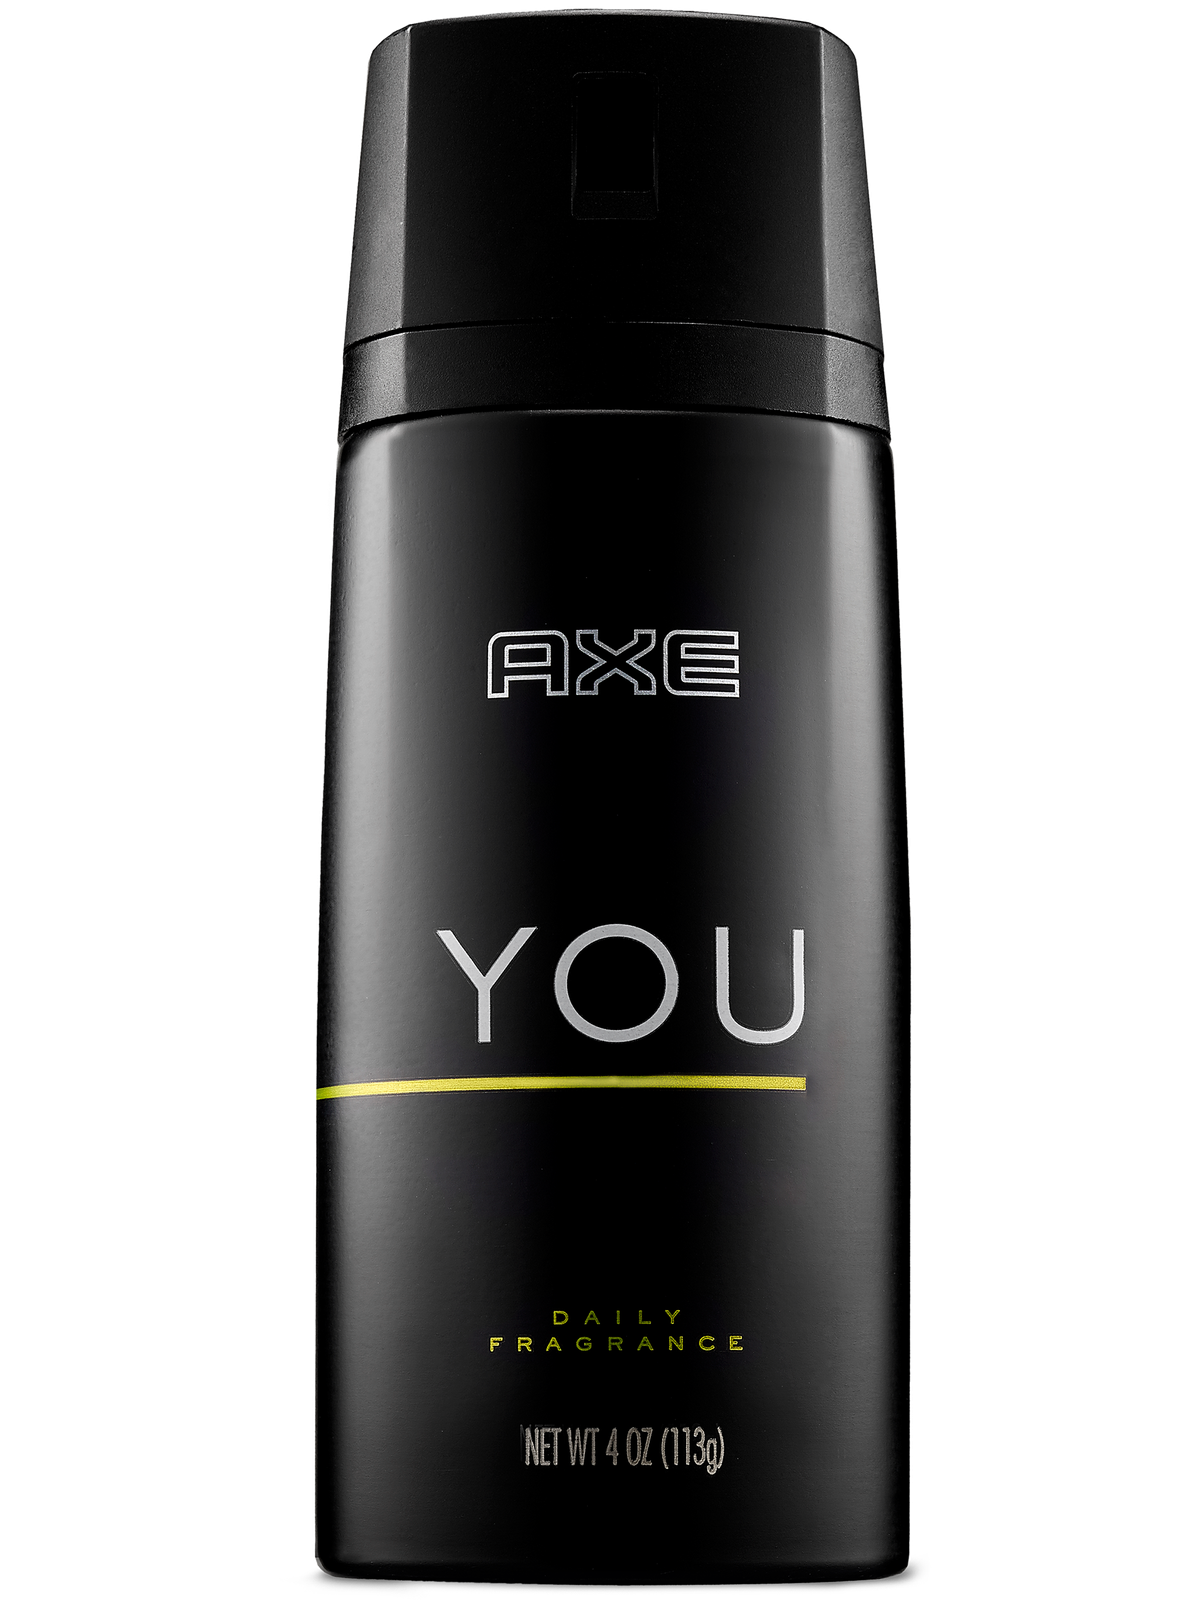 Axe Leaves Behind Its Legacy of Sexism by Tackling Toxic ...